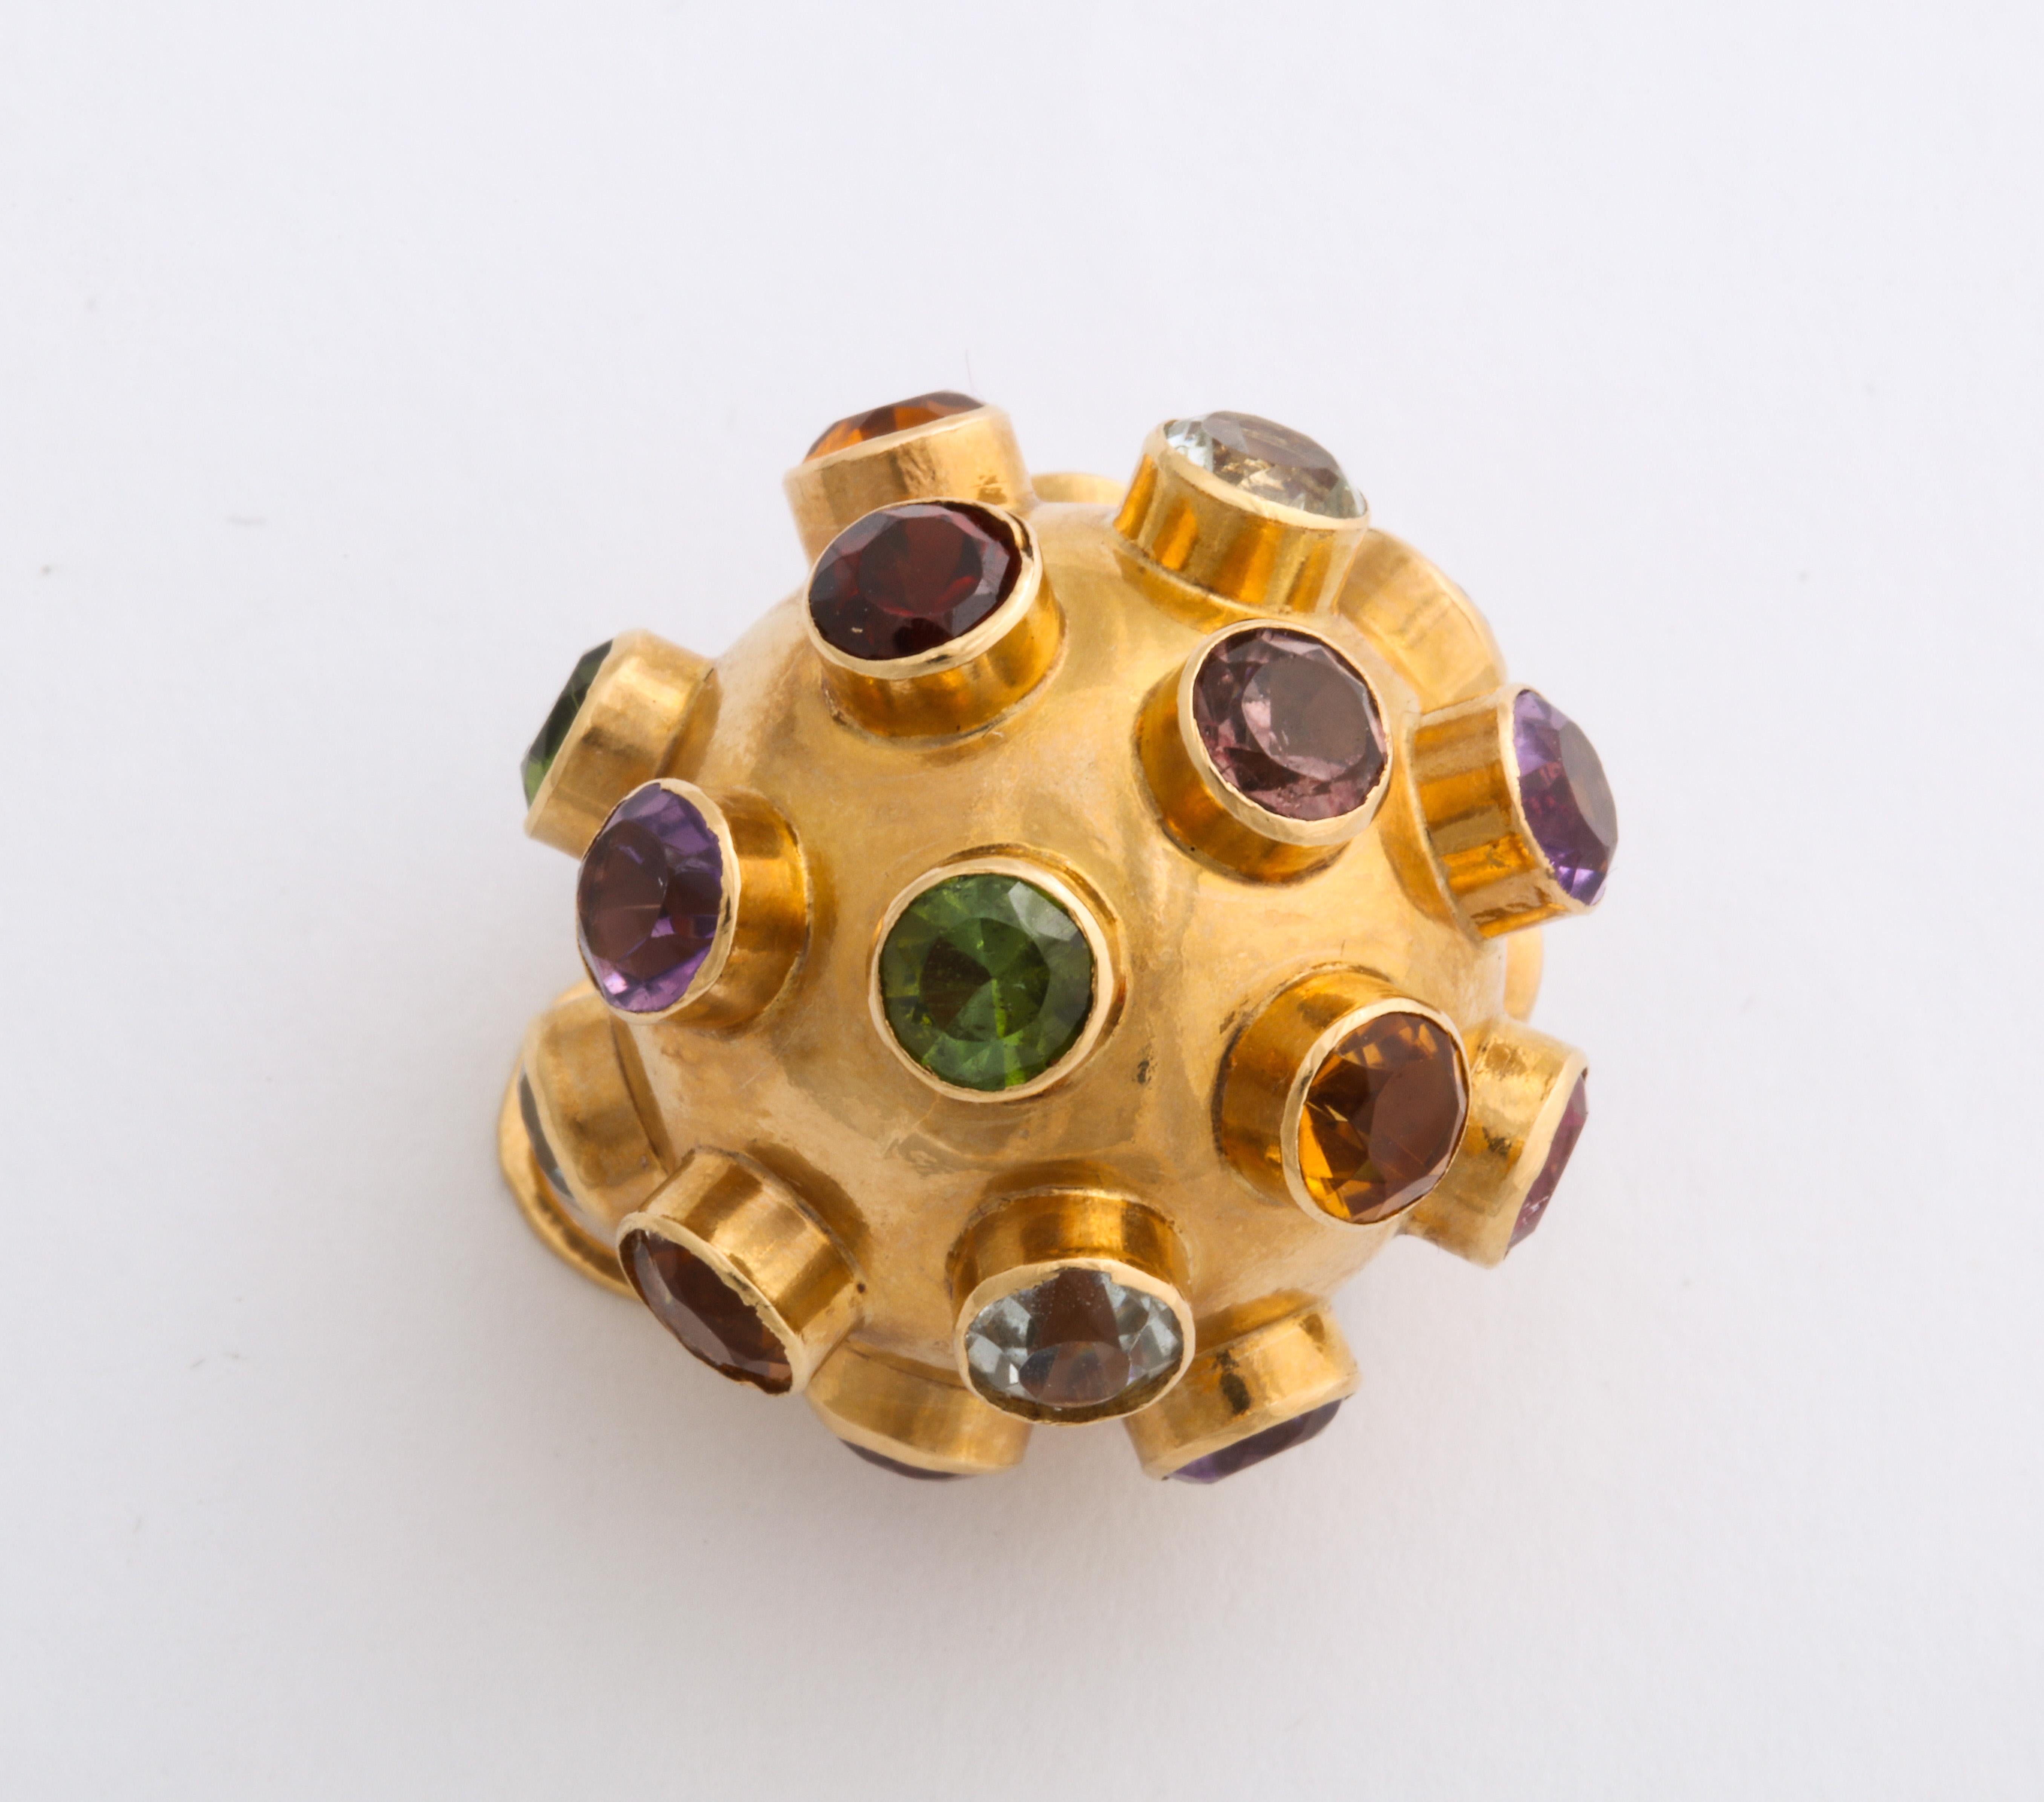 In 18 Kt, this pendant or charm, a gem studded ball, is set with colors true to their calling, garnet, aquamarine, citrine, amethyst, sapphire and green tourmaline. The stones are deeply set, each in their own collet. Sputnik, the first artificial